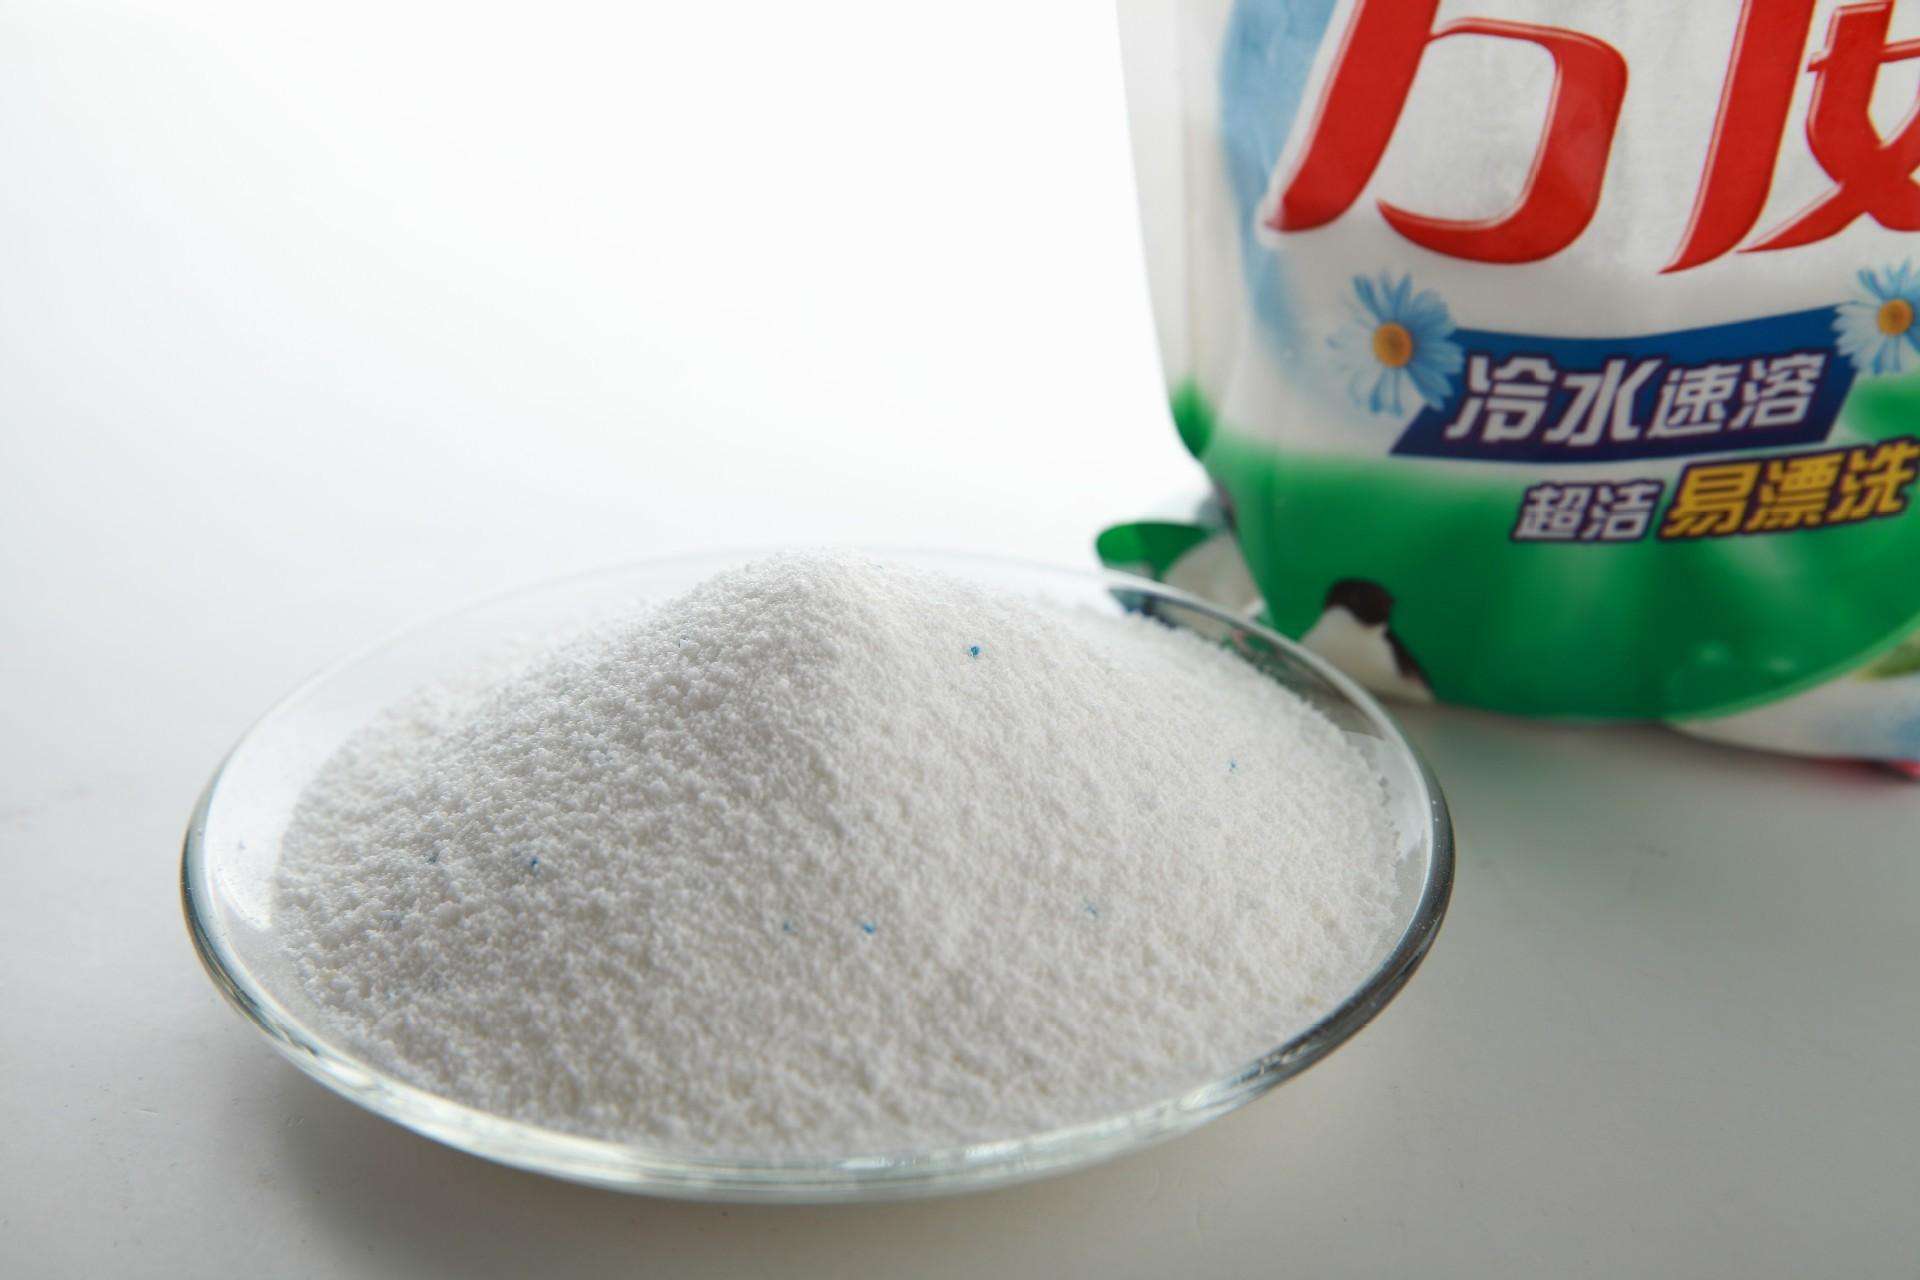 what are optical brighteners in laundry detergent？